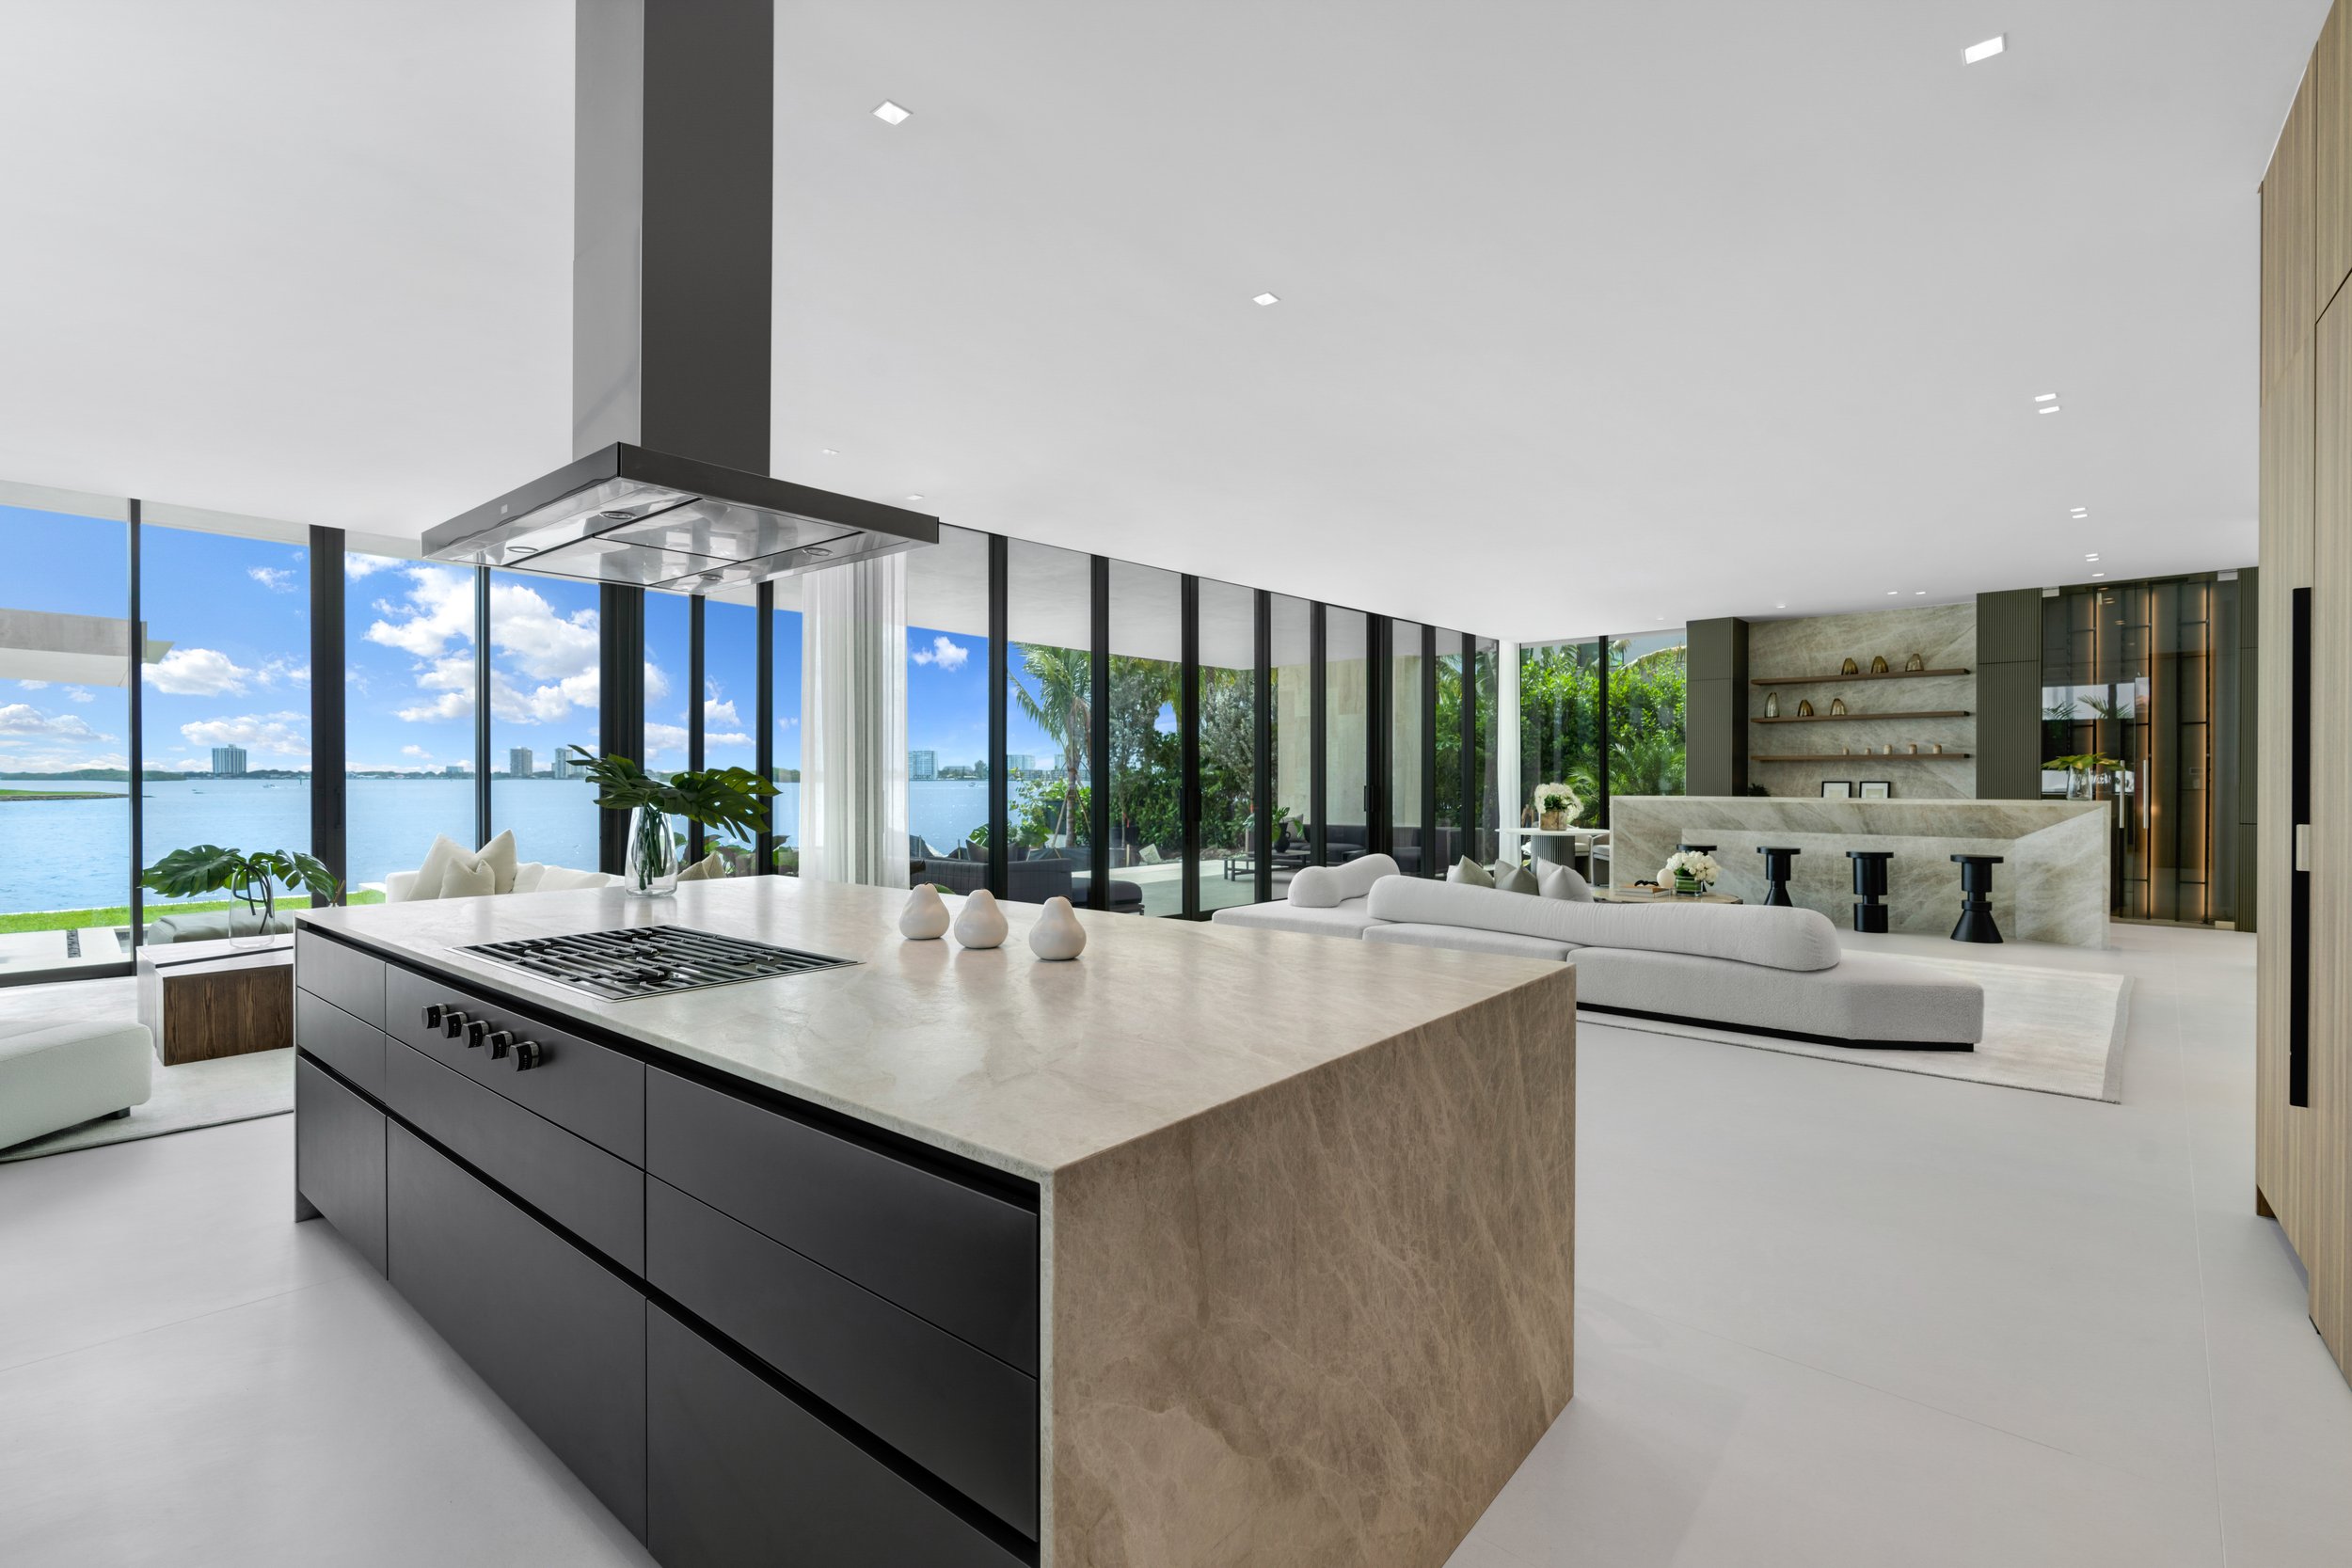 Check Out The Tropical Modern Waterfront On Bay Harbor Islands Asking $22.95 Million 5.jpg